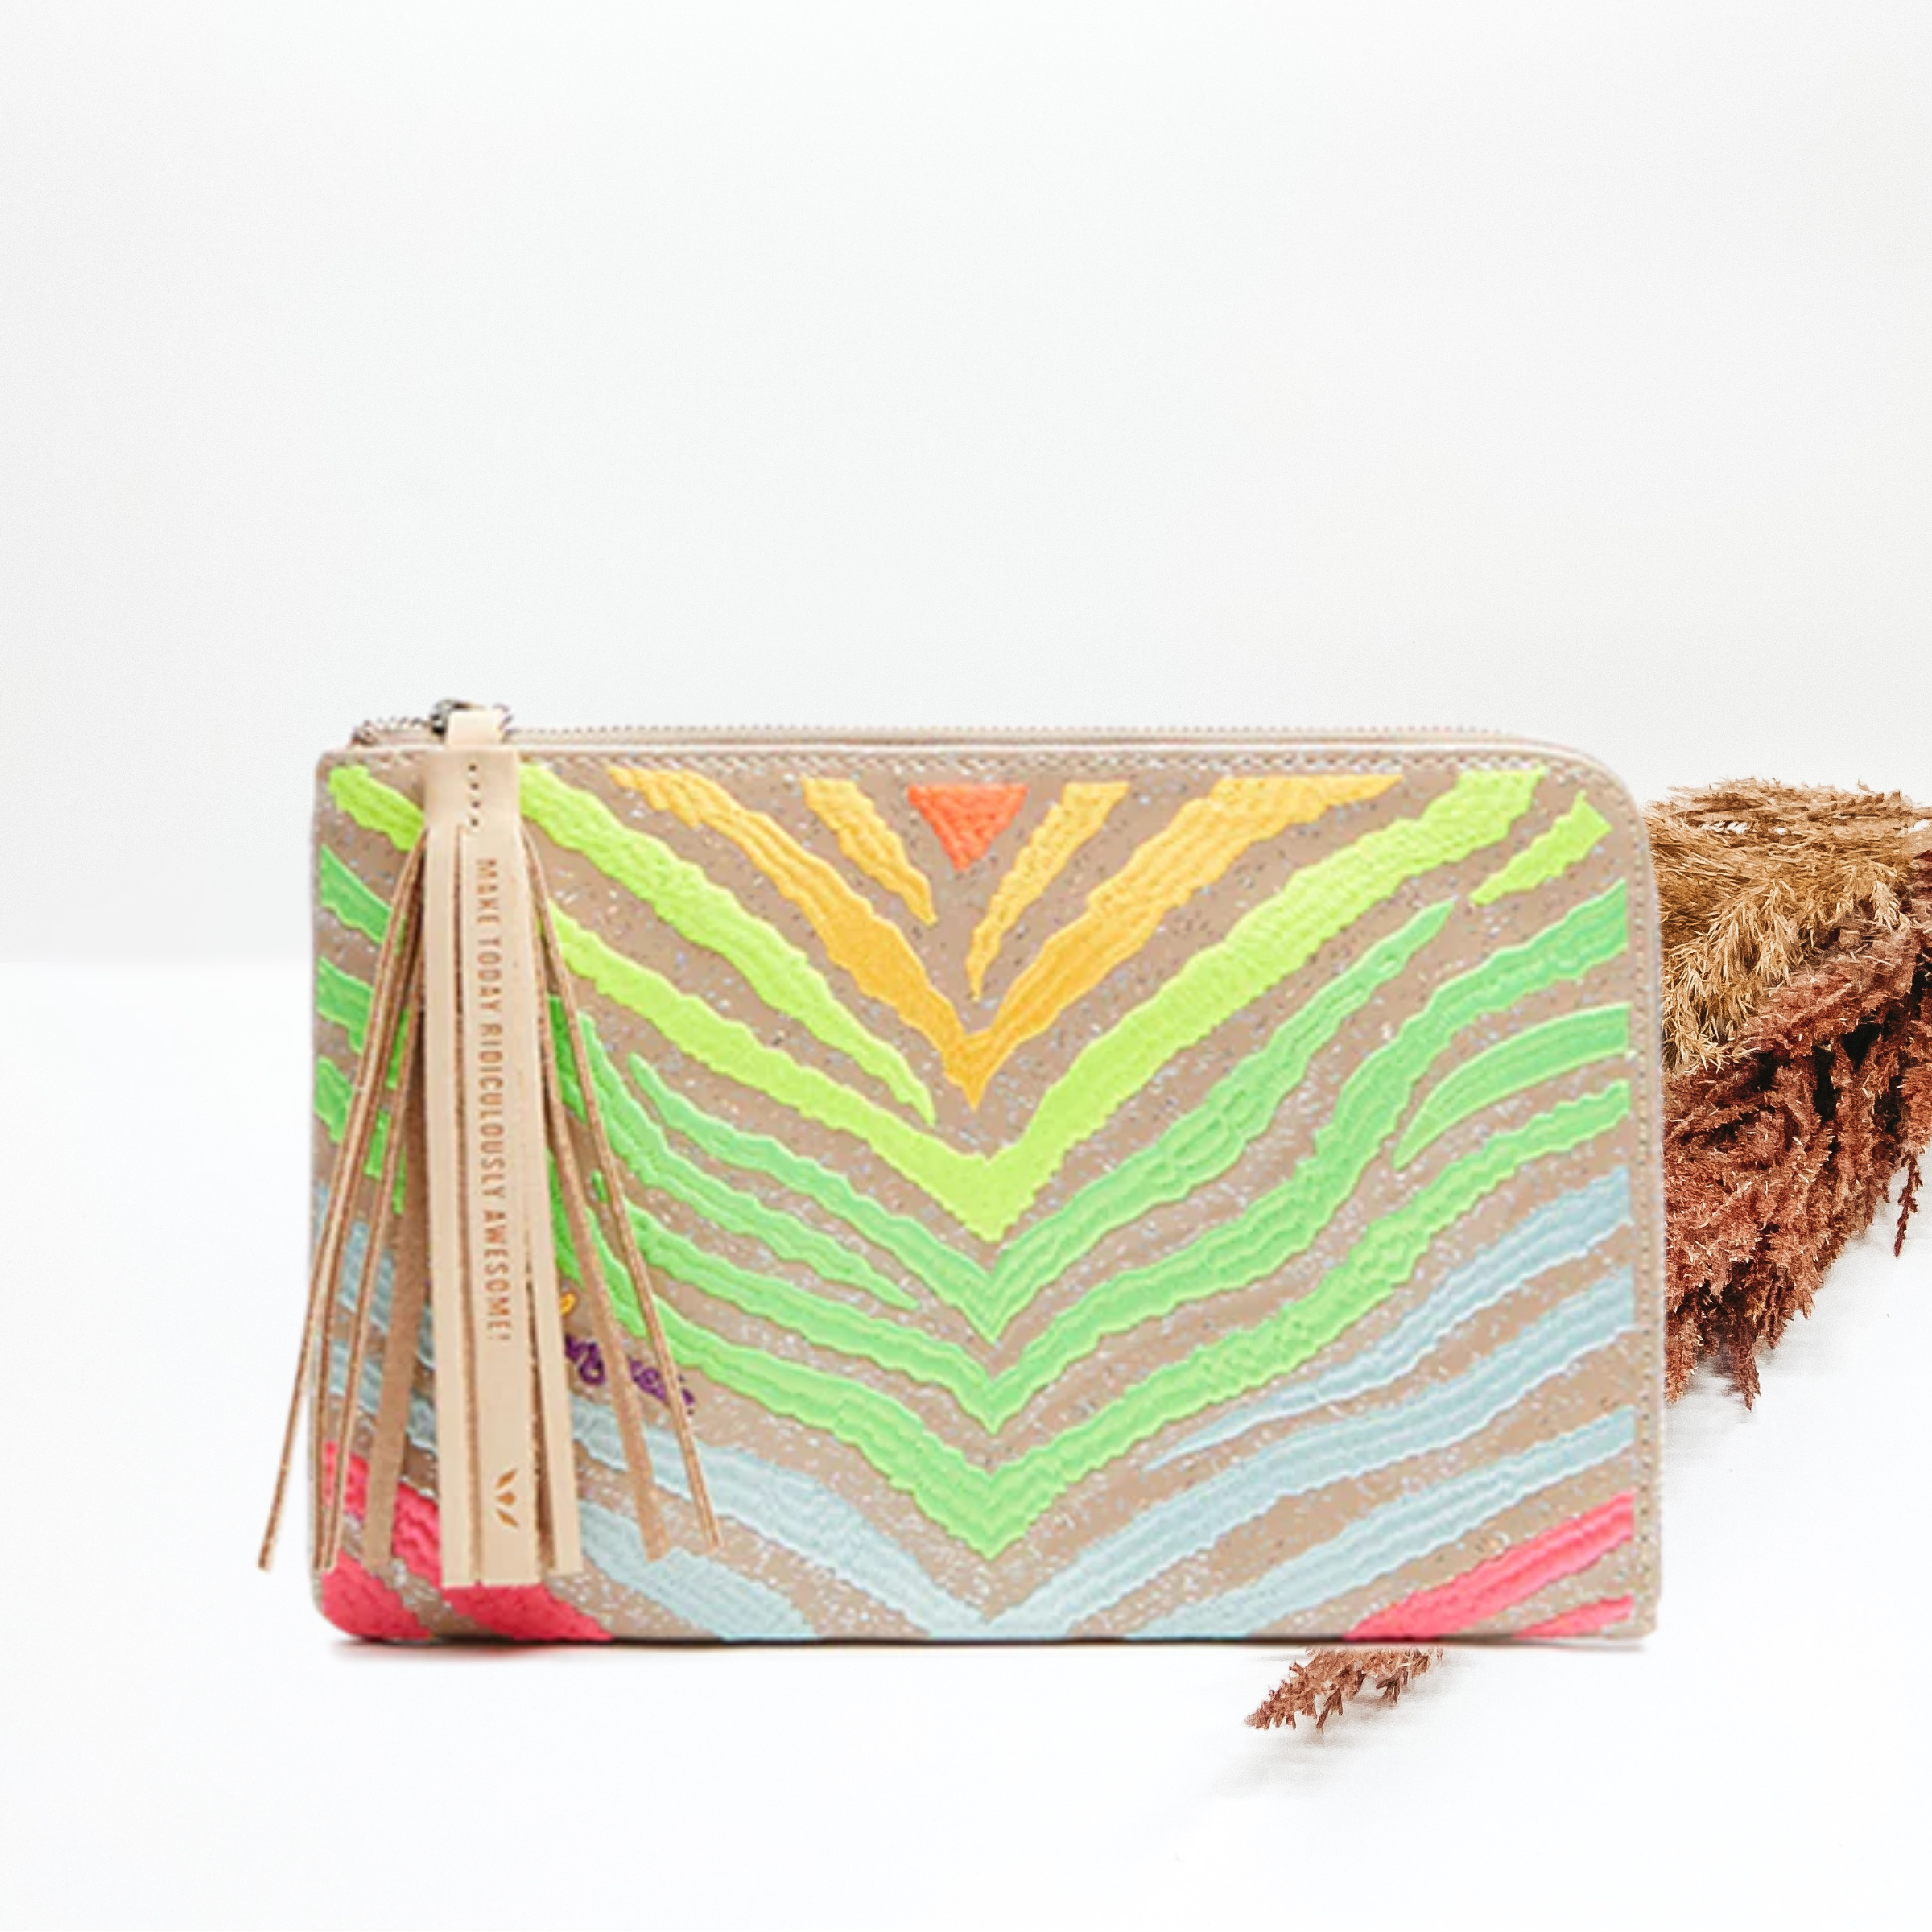 Consuela | Veronica L-Shaped Clutch - Giddy Up Glamour Boutique